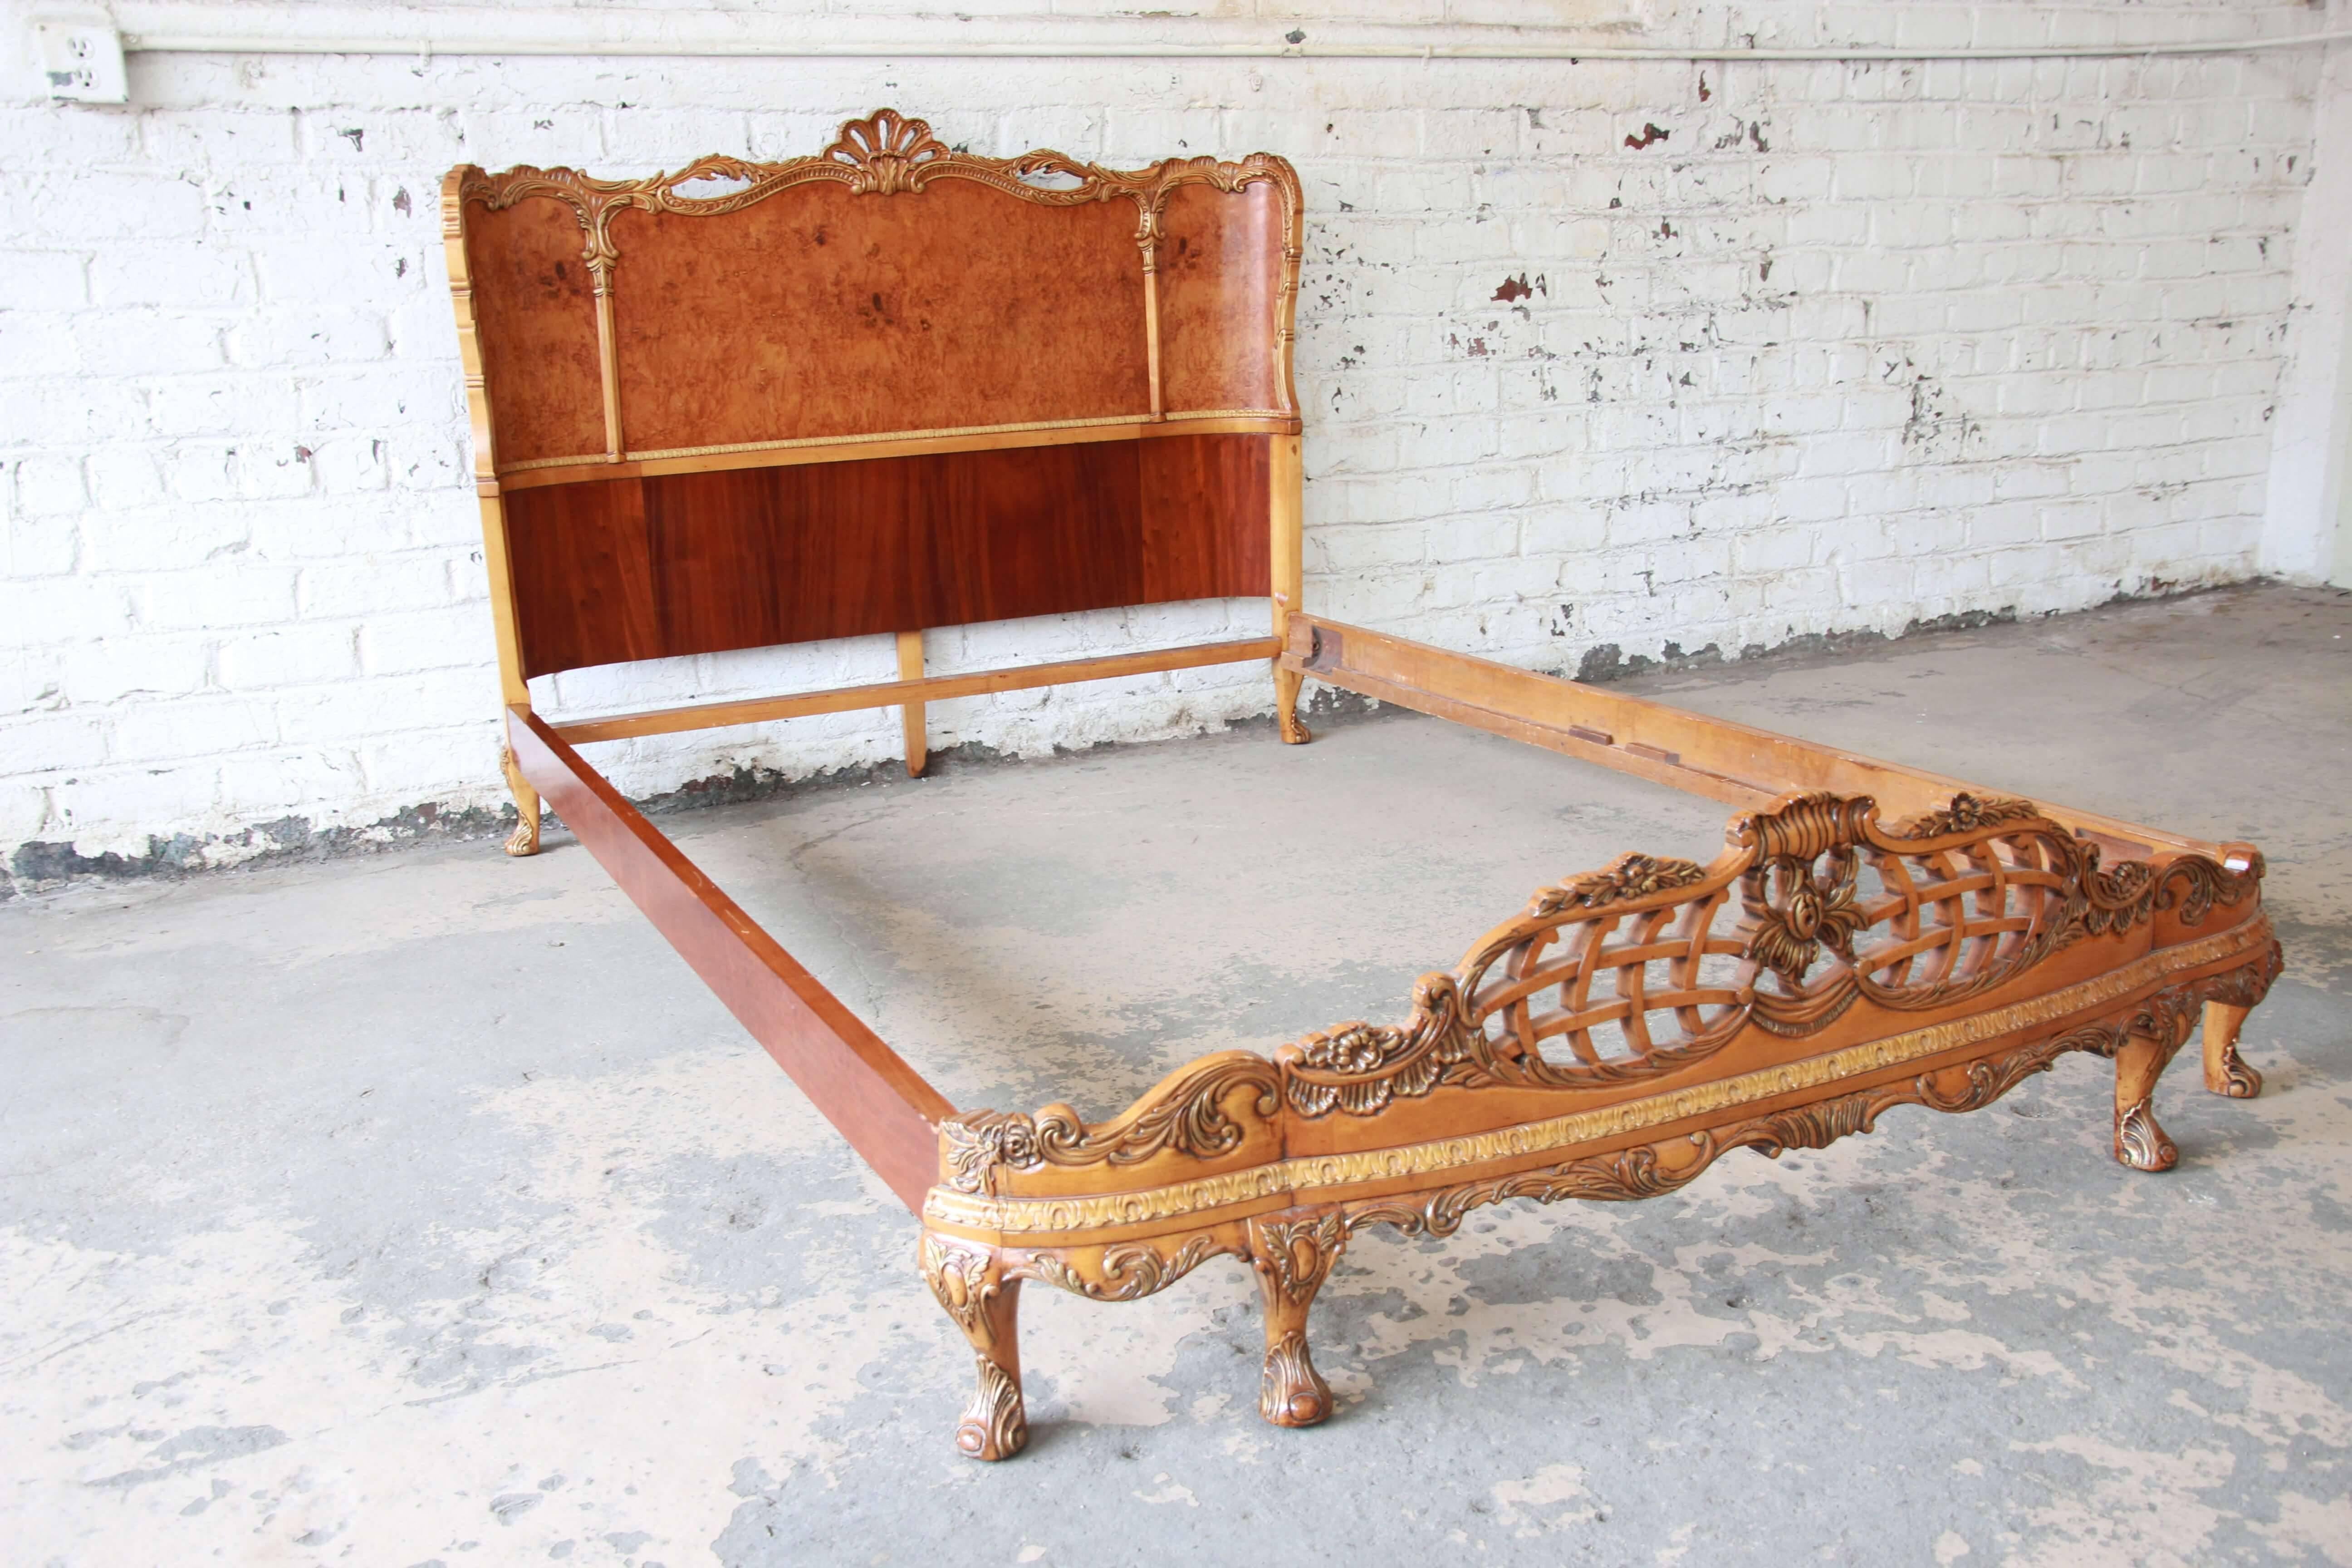 Offering a beautiful 1920s burled maple full-size bed by Romweber. This stunning French piece has intricate and ornate carvings with eye catching burled wood. The headboard and footboard both have pierced wood design and traditional French styles.